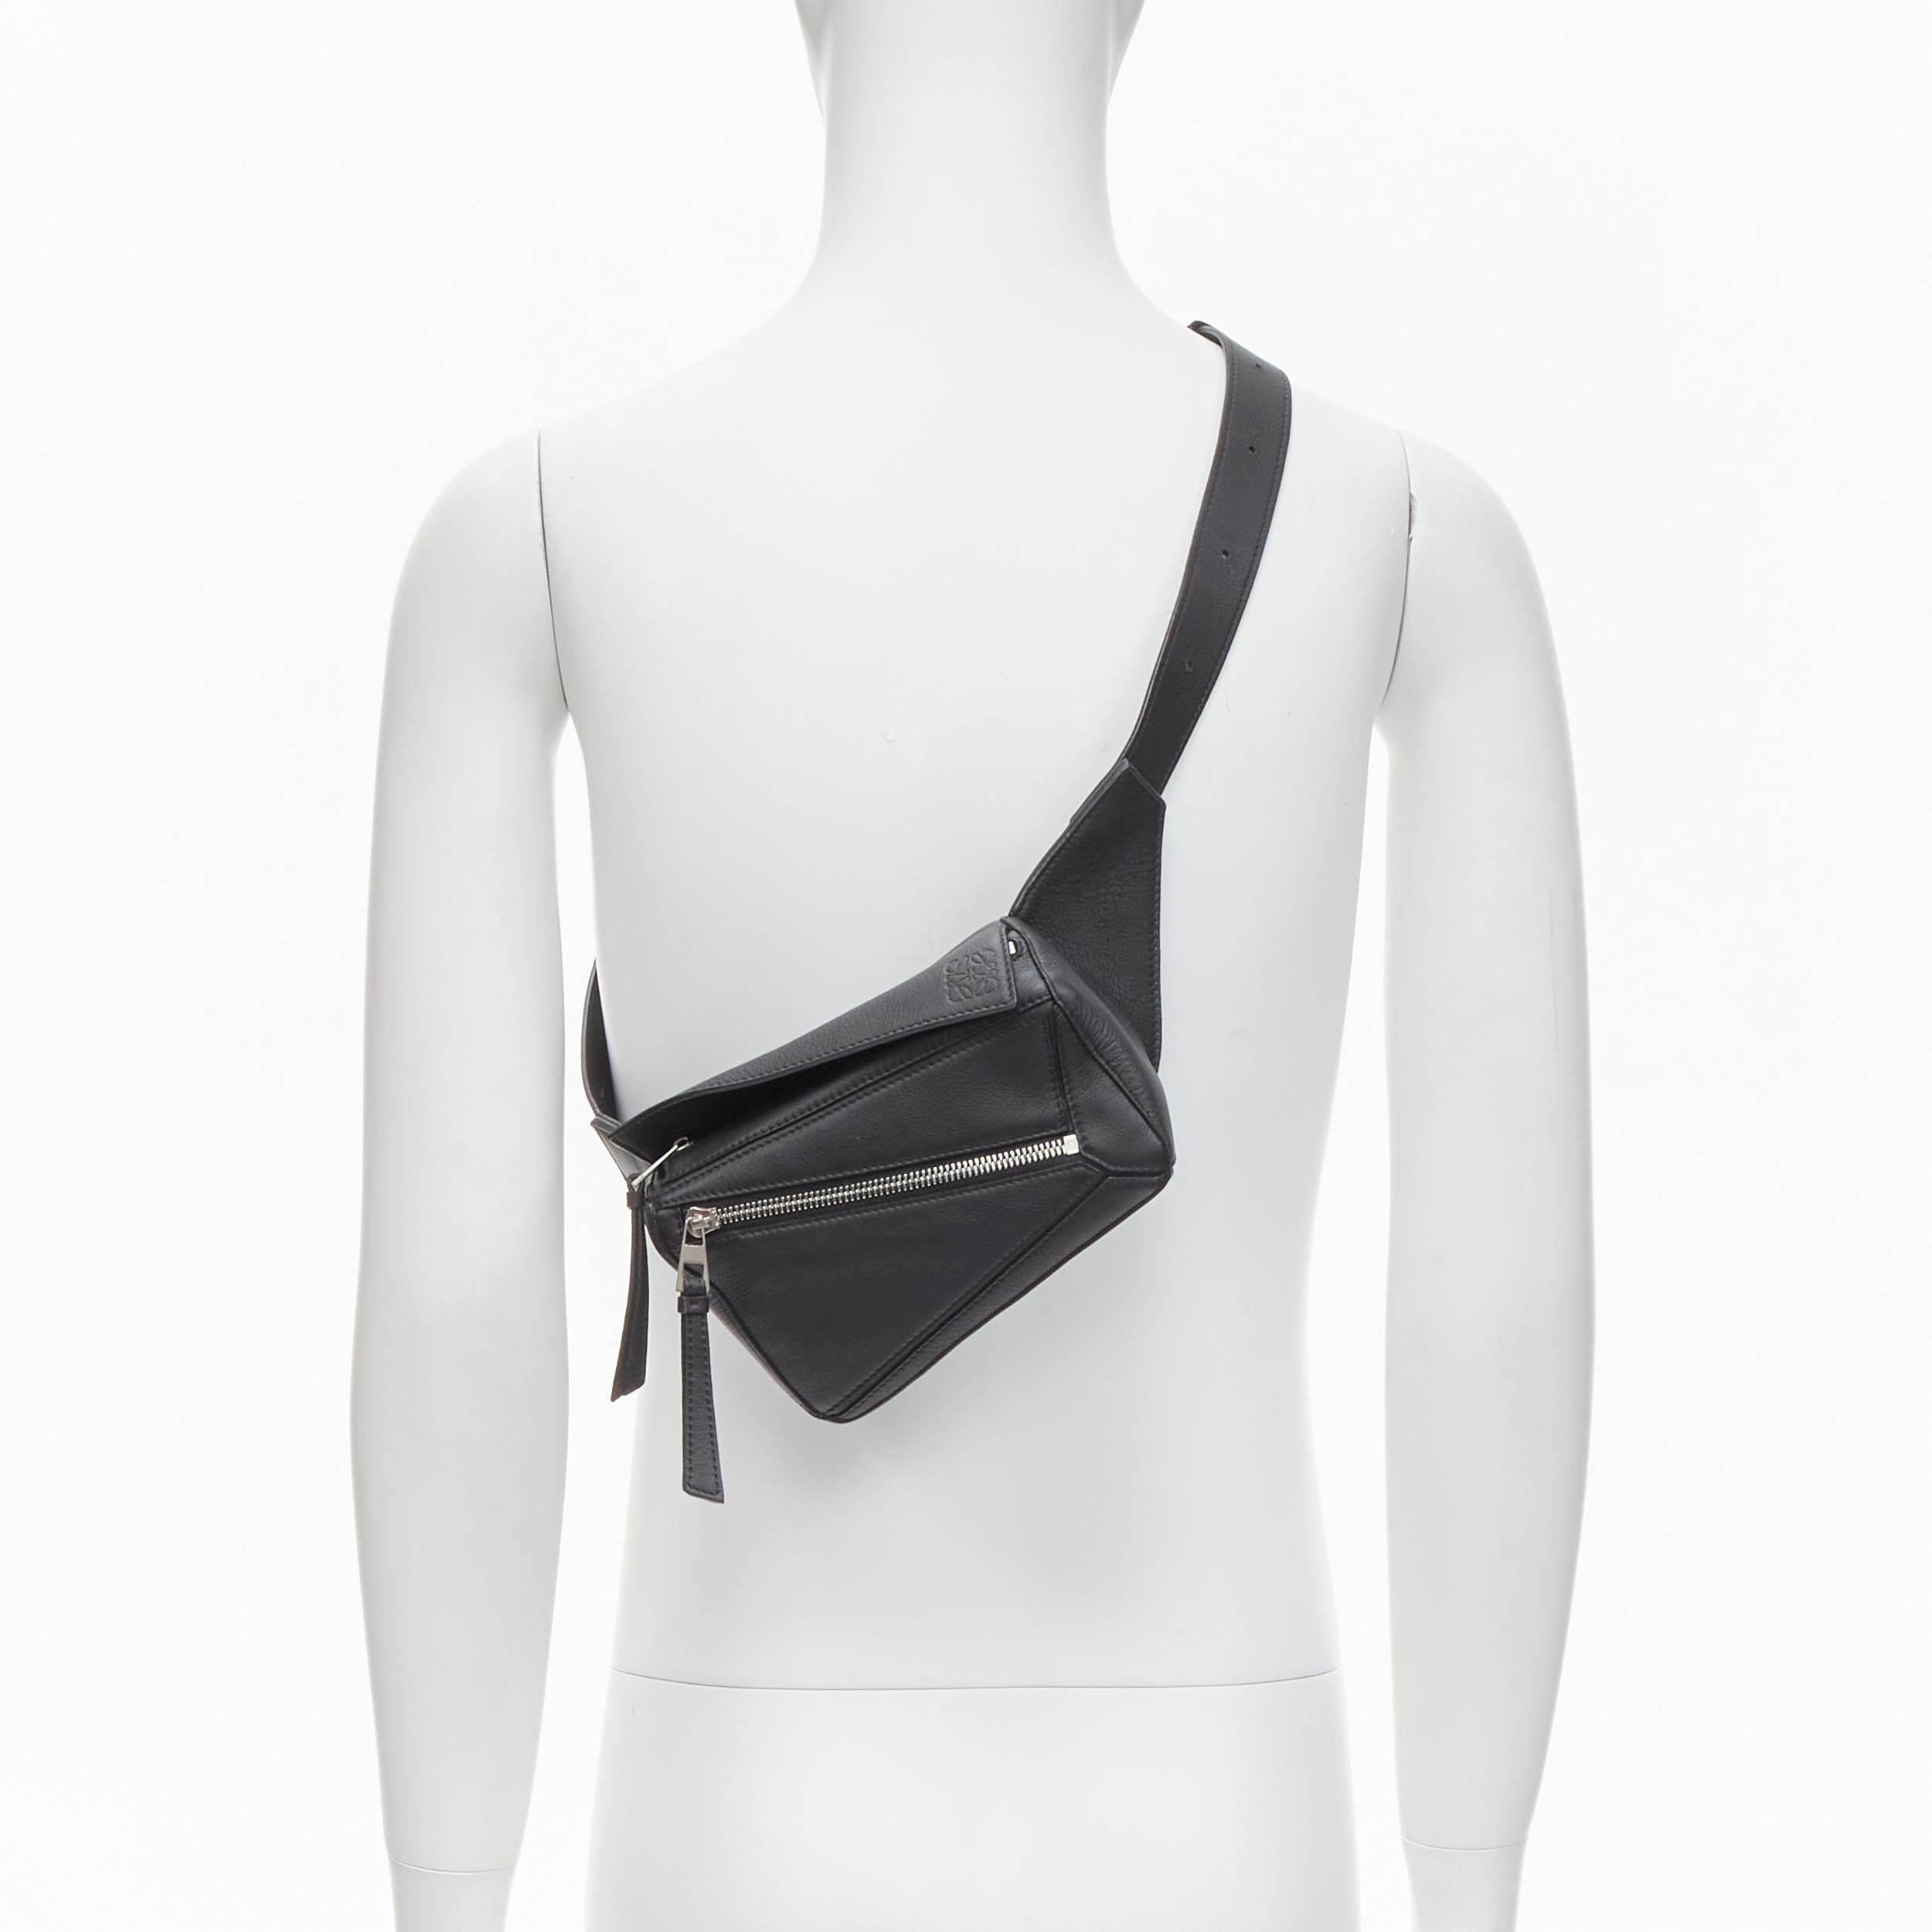 new LOEWE JW ANDERSON 2022 Puzzle black leather mini belt bag
Brand: Loewe
Designer: JW Anderson
Model: Puzzle Belt bag
Collection: 2022 
Material: Leather
Colour: Black
Pattern: Solid
Closure: Zip
Extra Detail: Signature Puzzle bag made into a